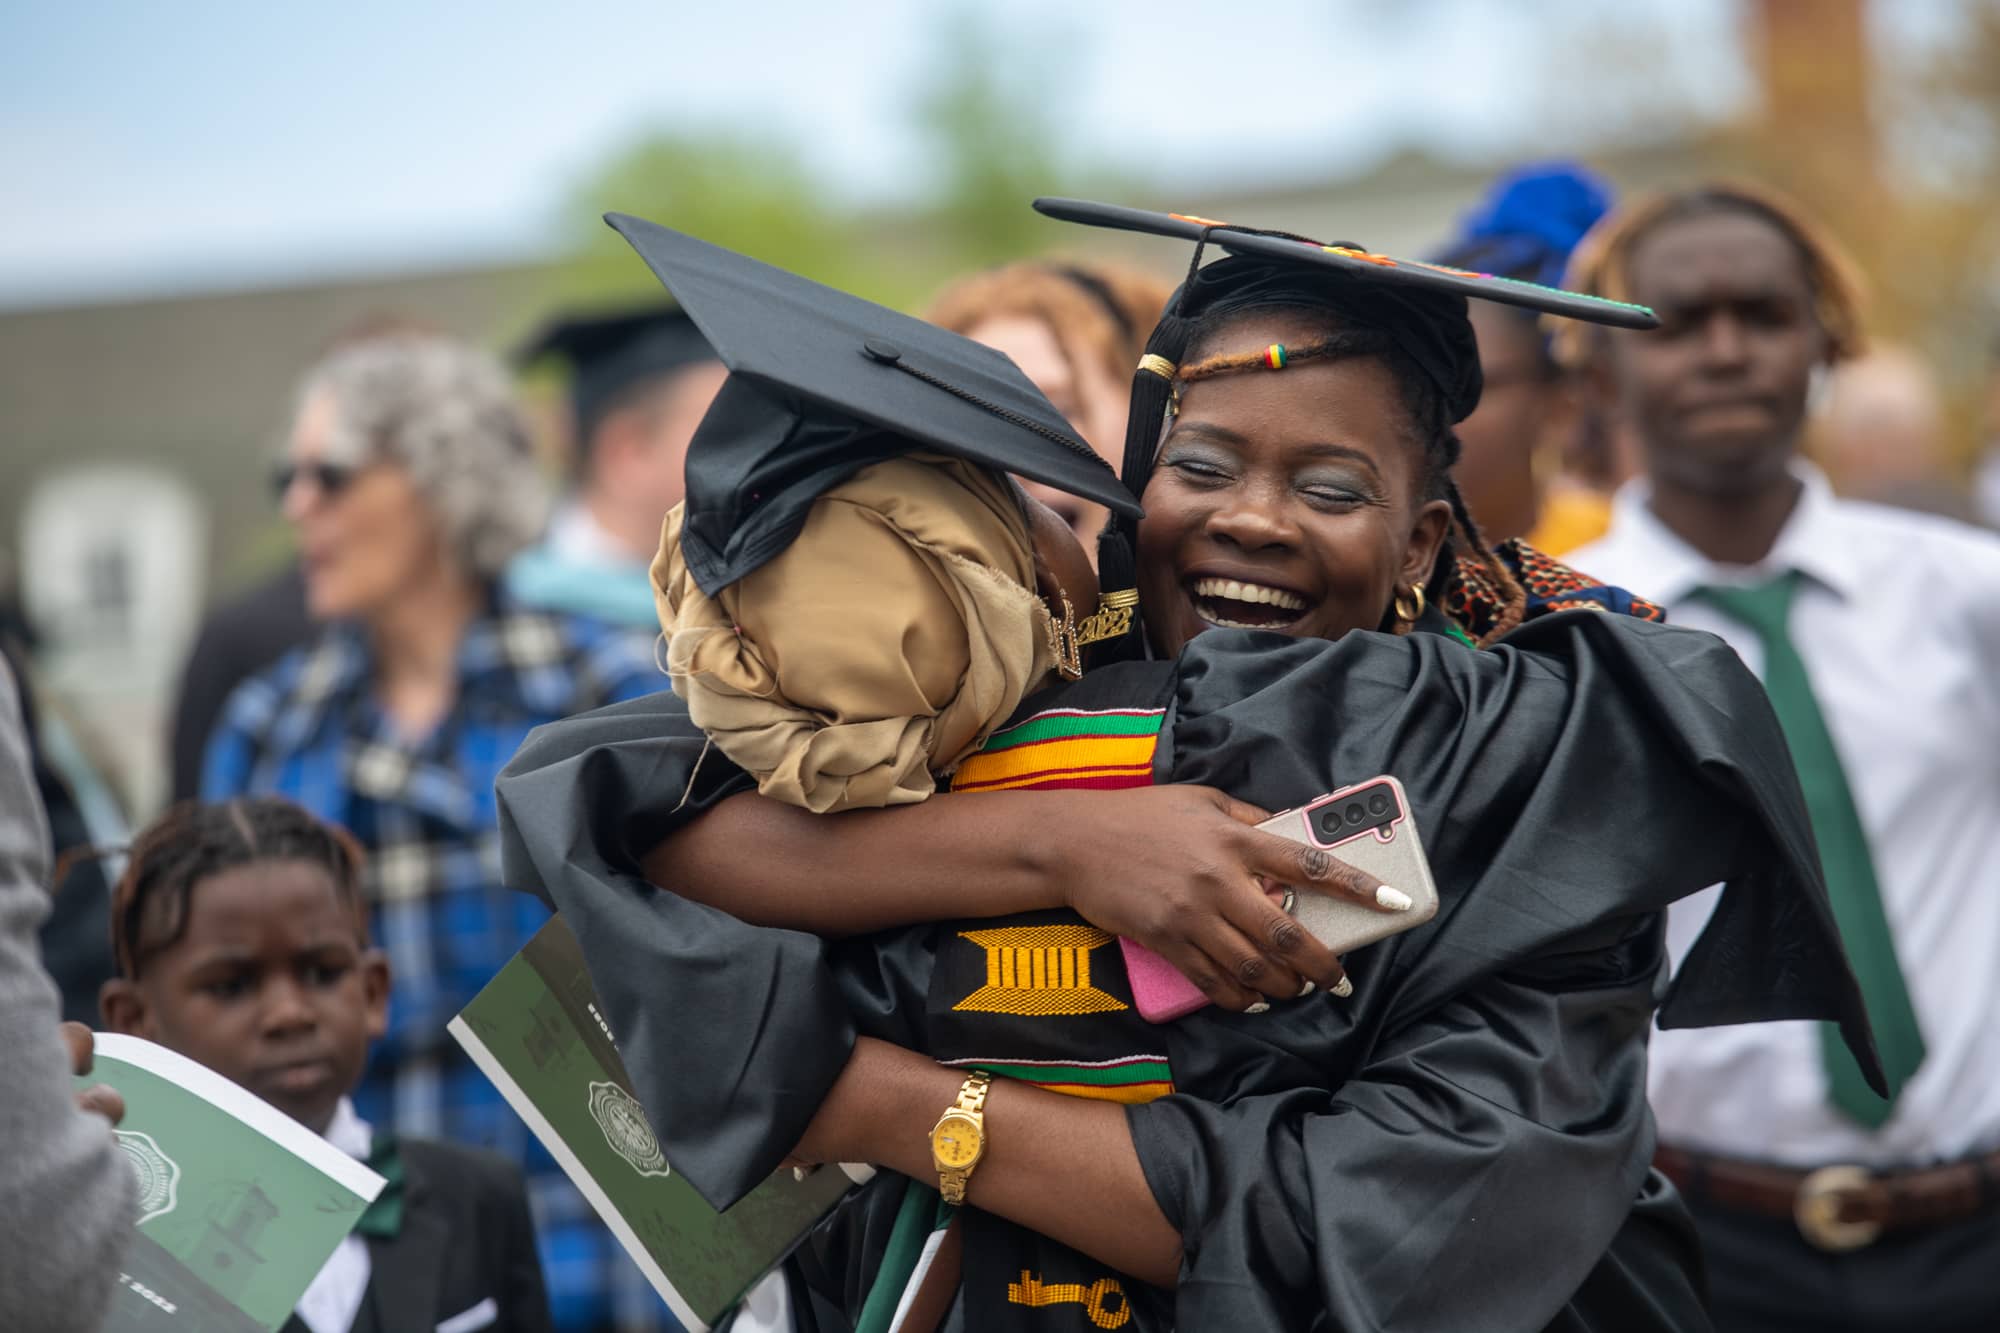 Two people hugging at Ohio University graduation commencement